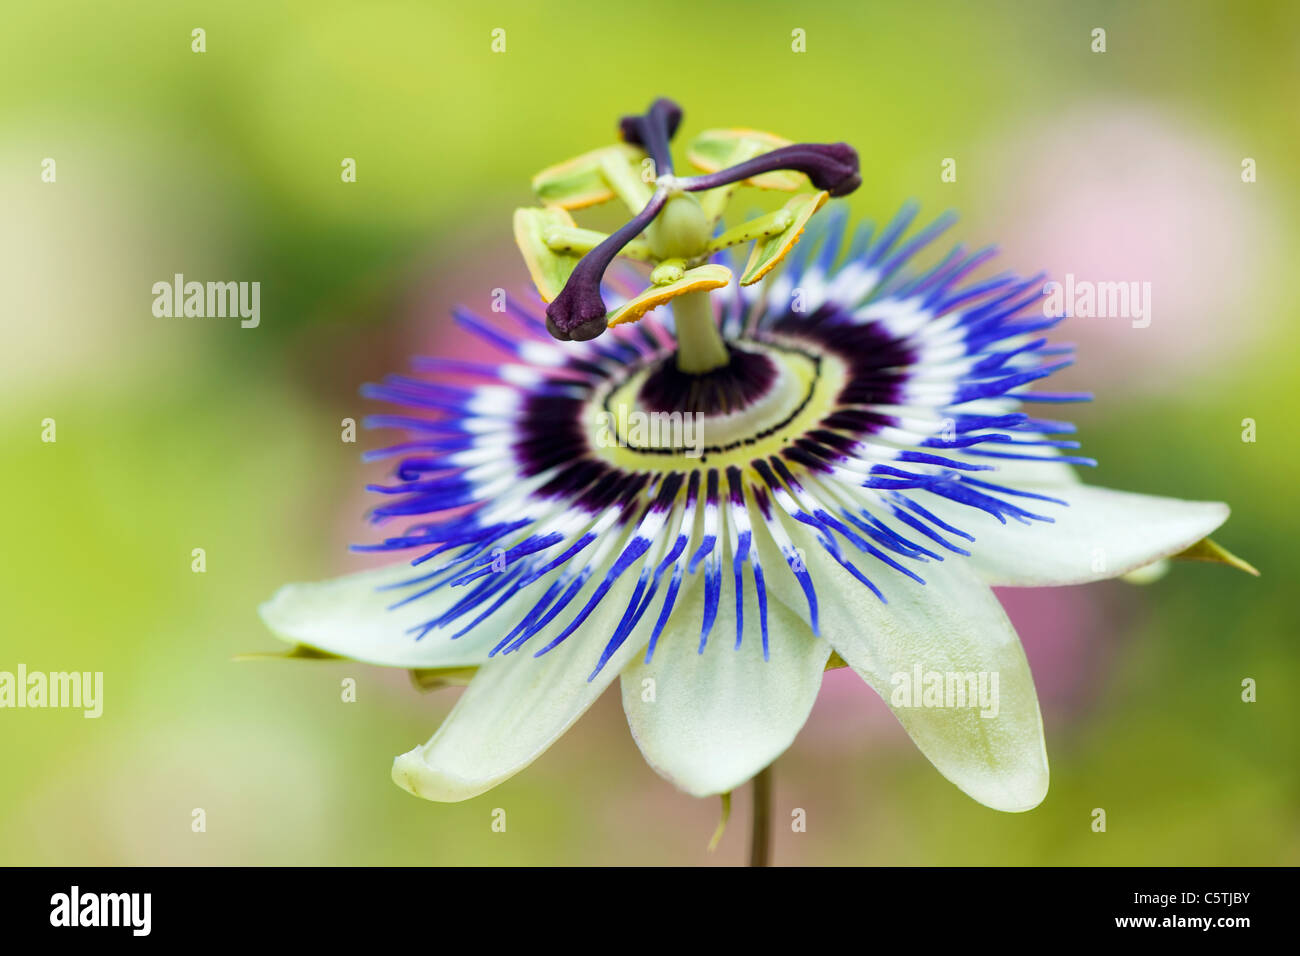 Close-up/Macro image of the vibrant Passiflora caerulea summer flower, also known as the blue passion flower. Stock Photo